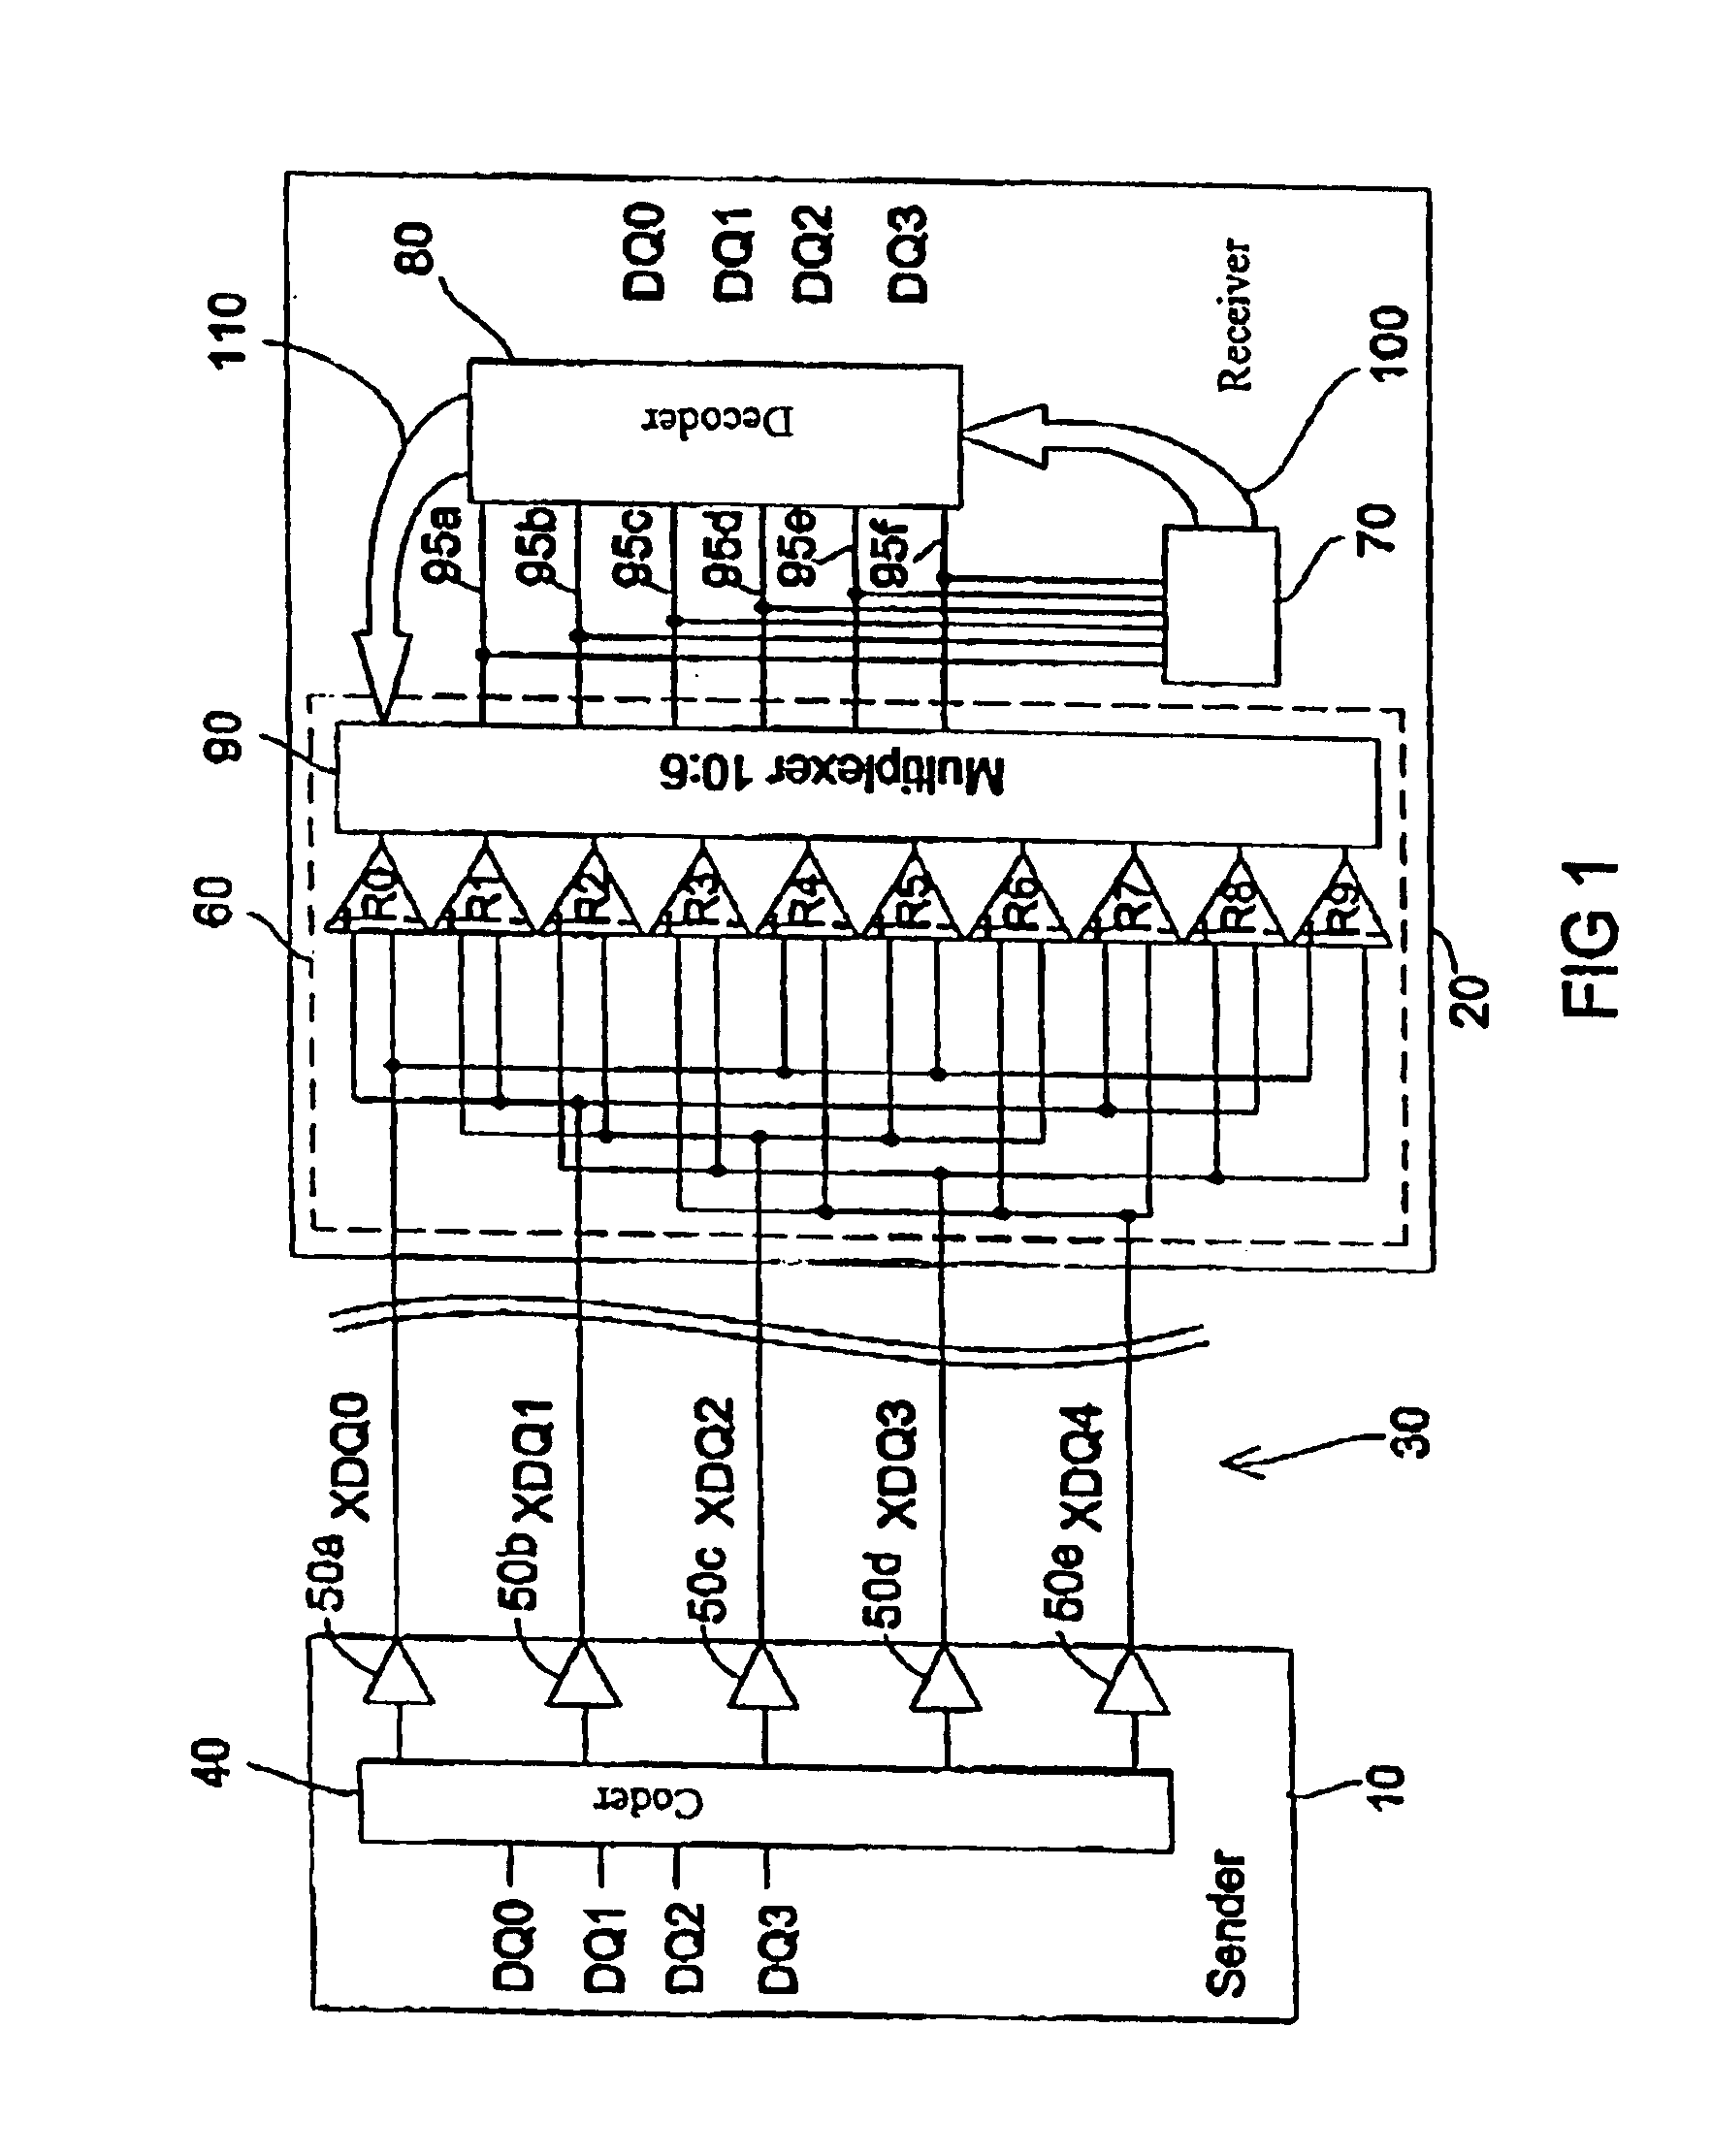 Transmission and reception interface and method of data transmission